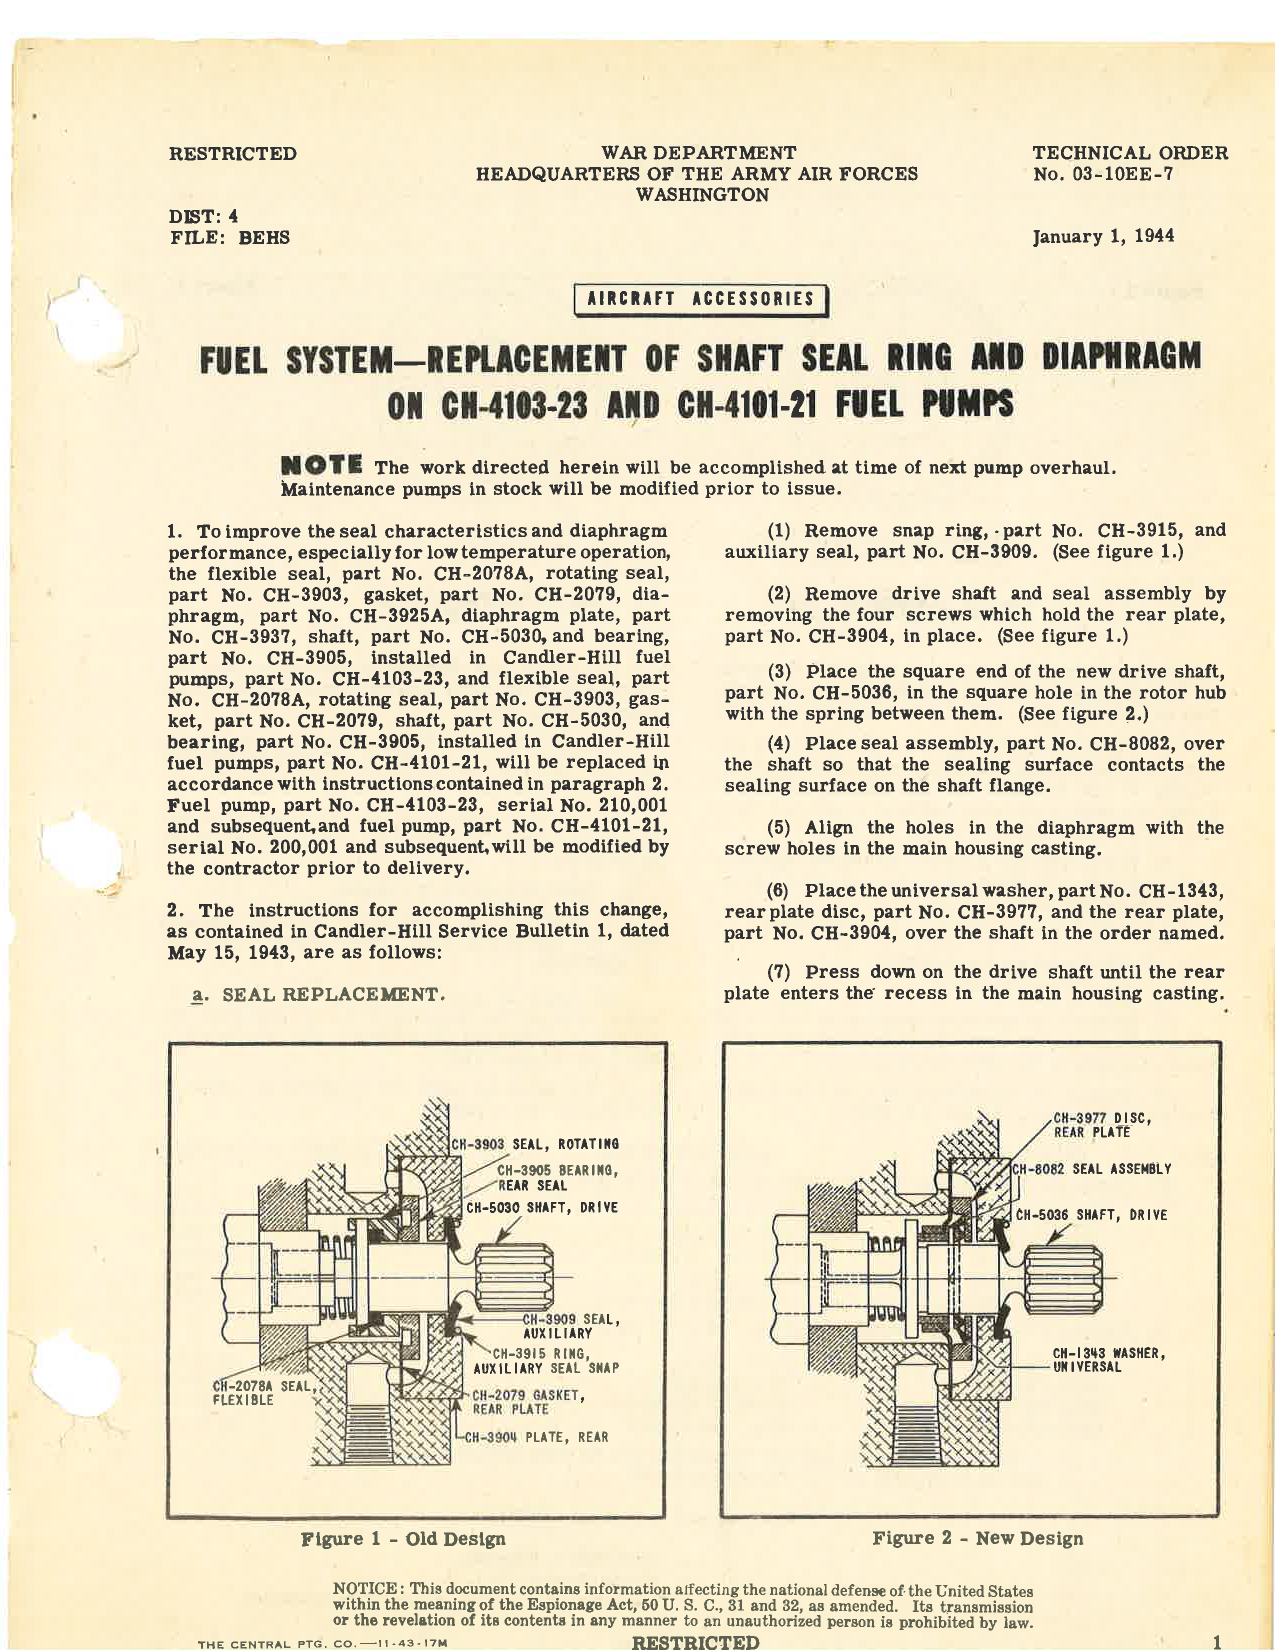 Sample page 1 from AirCorps Library document: Replacement of Shaft Seal Ring and Diaphragm on CH-4103-23 and CH-4101-21 Fuel Pumps